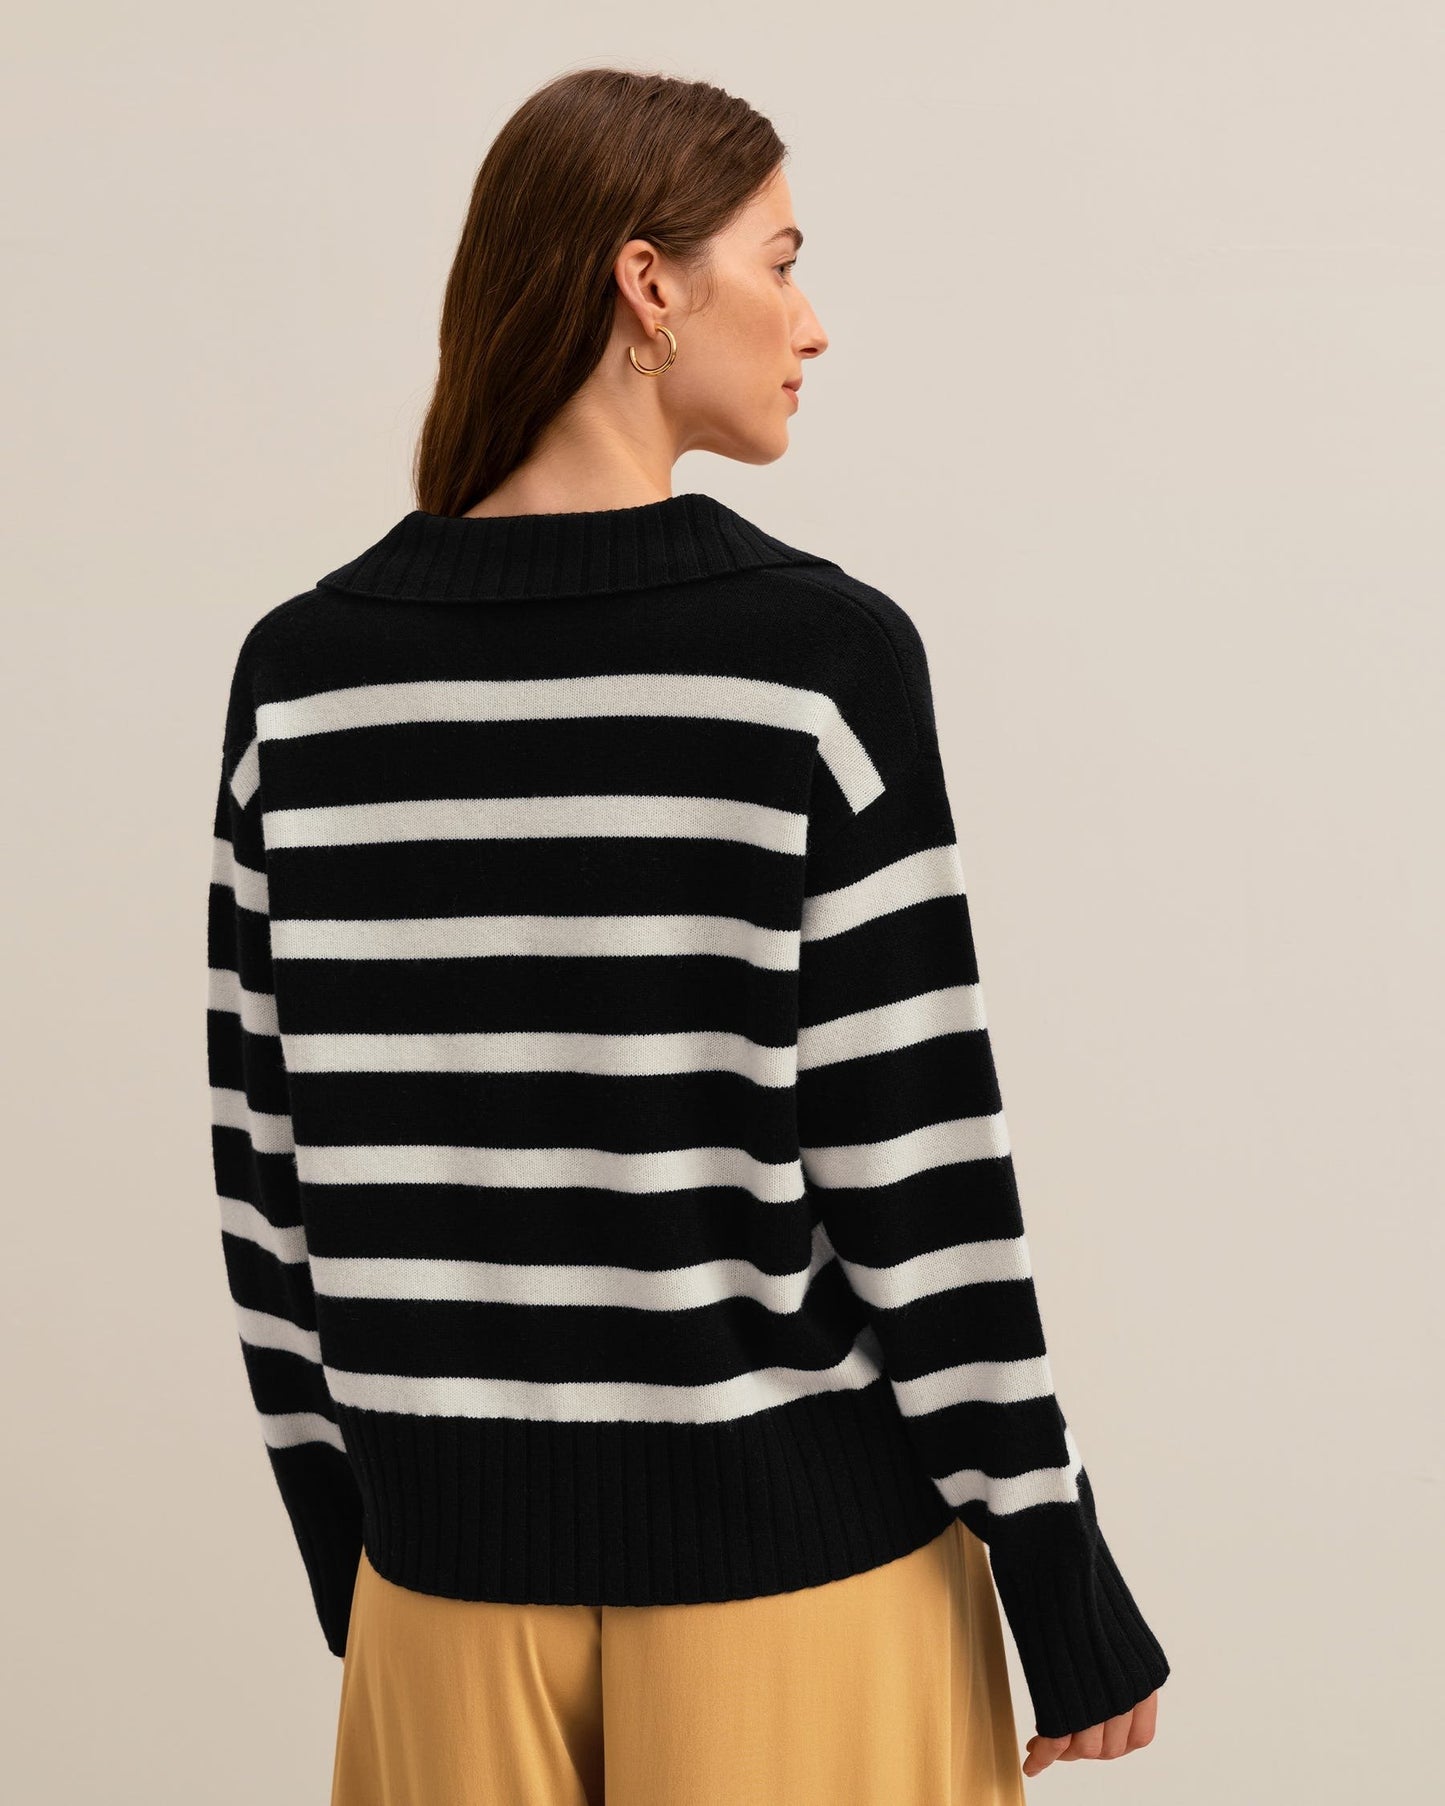 The Gilly Stripe Sweater